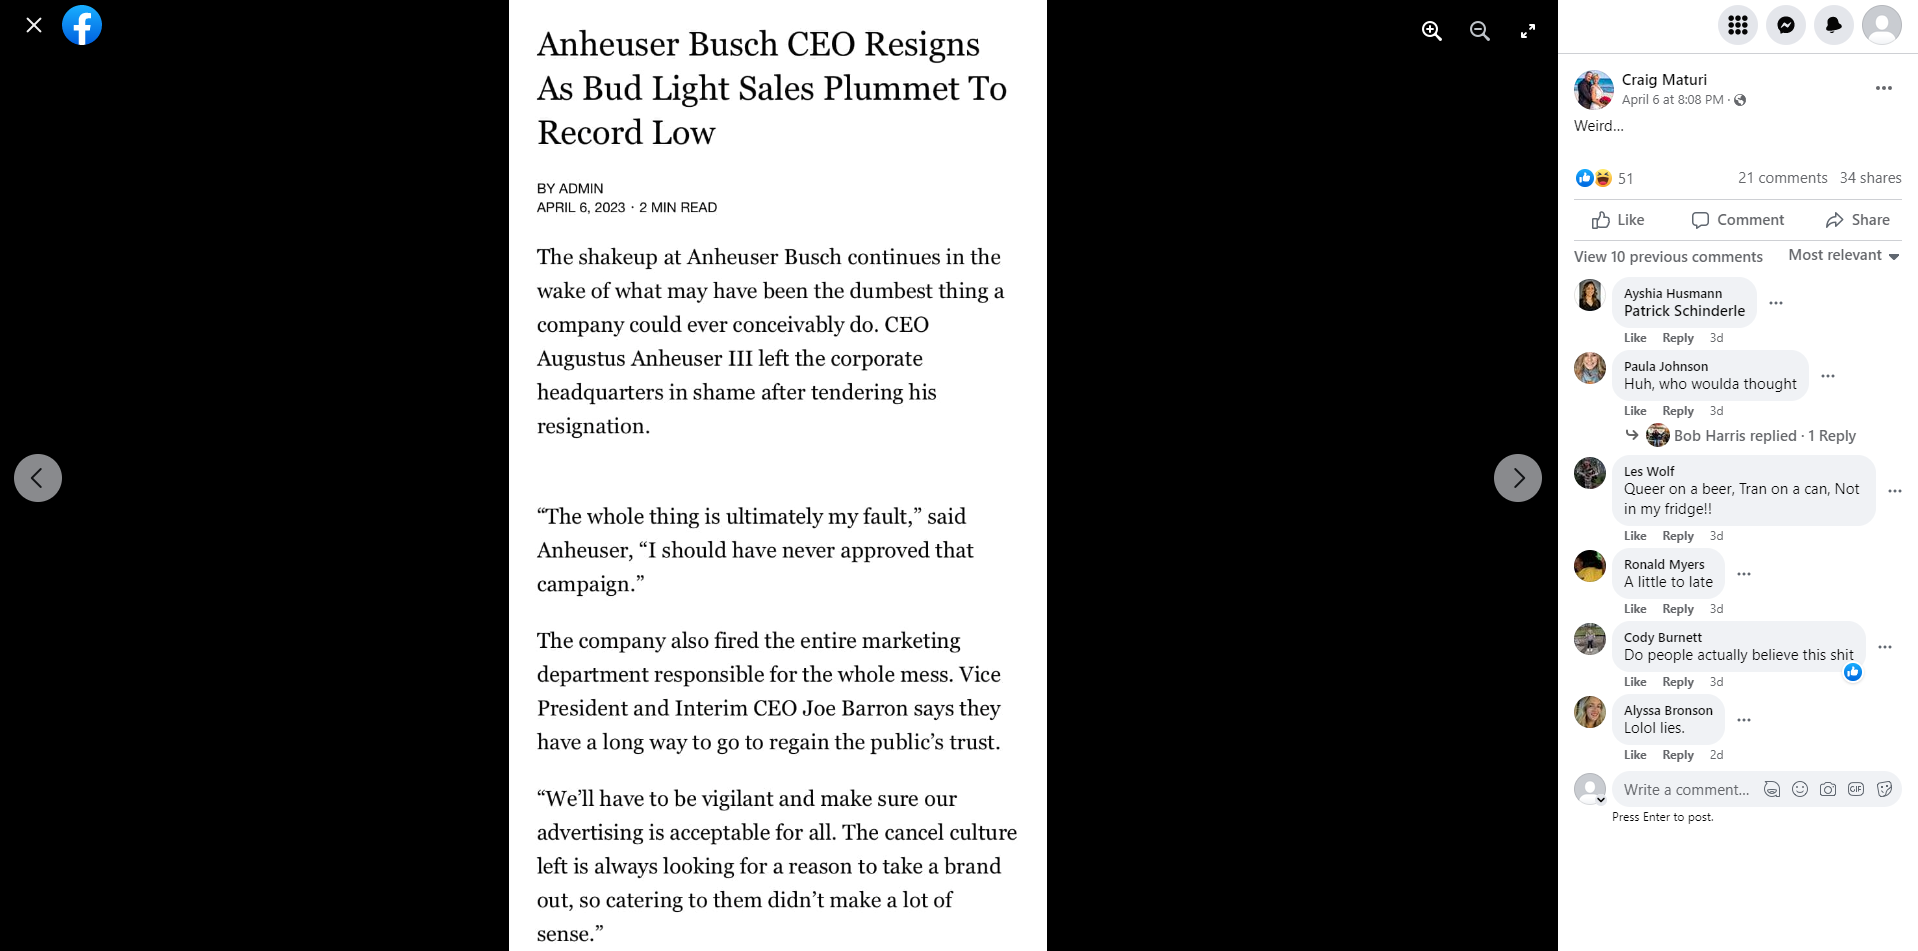 Fact Check: Anheuser-Busch CEO Did NOT Resign After 'Record Low' Sales ...